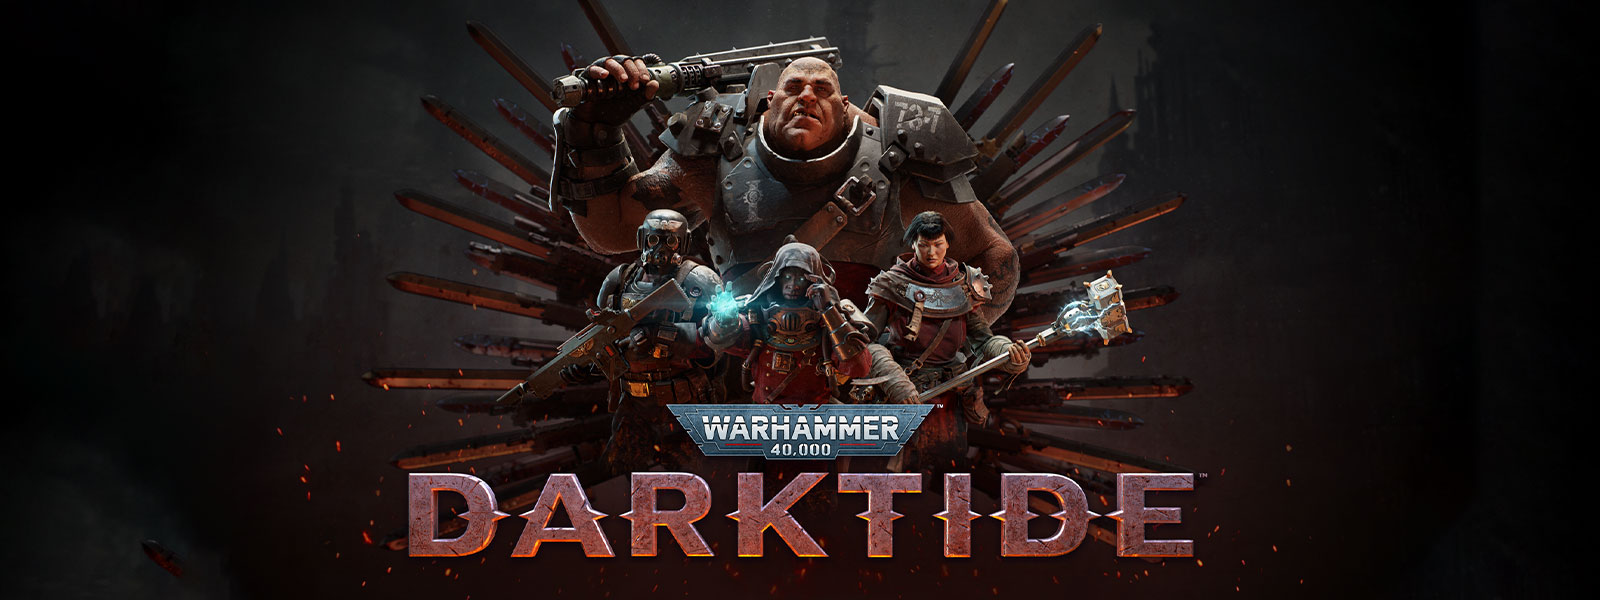 Warhammer 40,000: Darktide, A squad of armored characters pose in front of a blade motif.